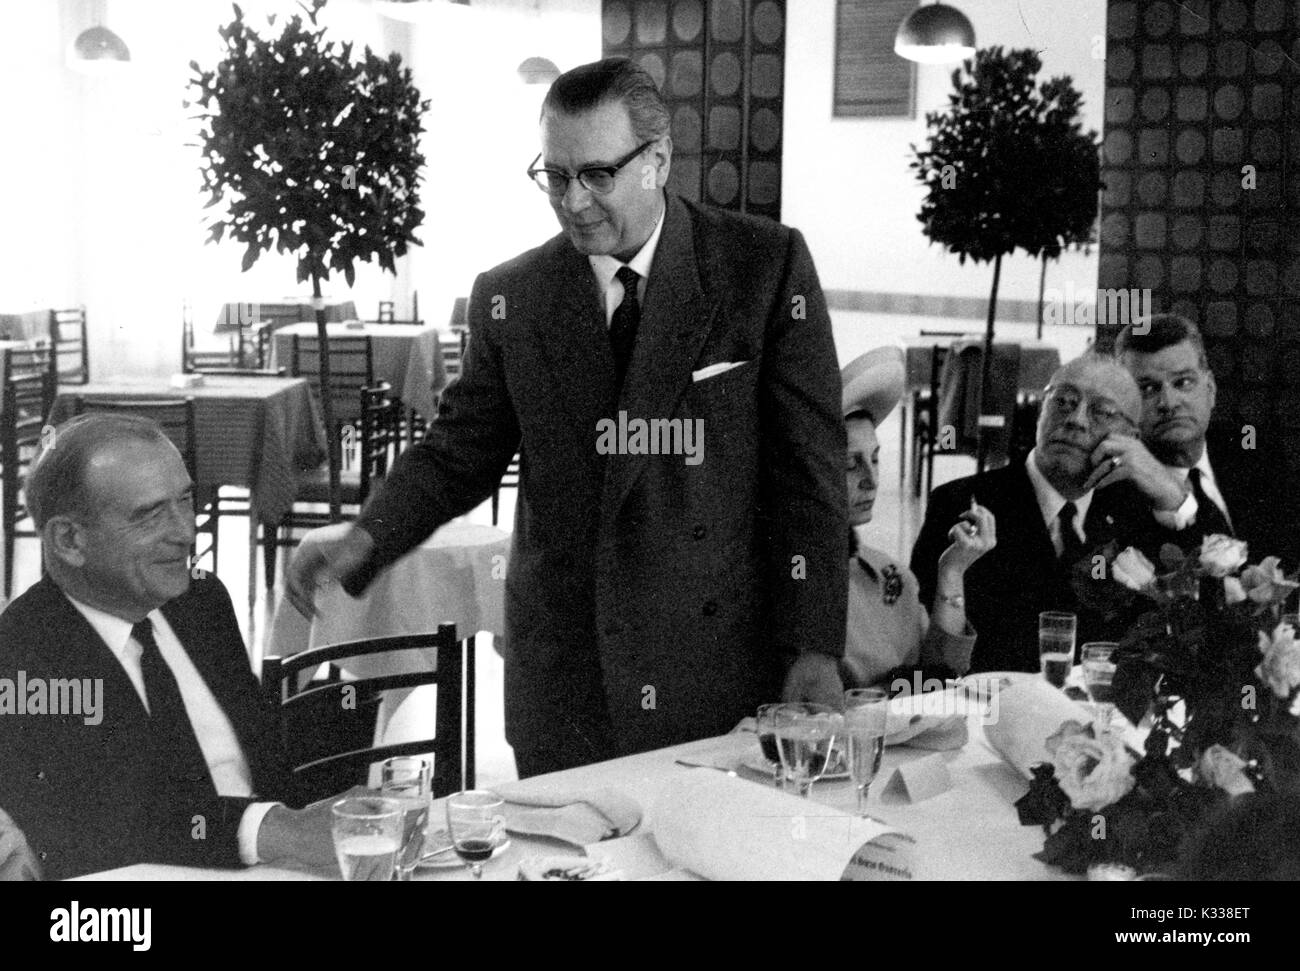 During the Associazione Italo-Americana Luncheon at the School of Advanced International Studies (SAIS) in Washington, DC, President of Johns Hopkins University Milton Stover Eisenhower -- around 62 years of age -- sits at a table with his wife to his right, while other luncheon guests take their seats, one gentleman standing in the middle, other tables and trees in the background, and plates and flowers on the table in front, Washington, DC, 1965. Stock Photo